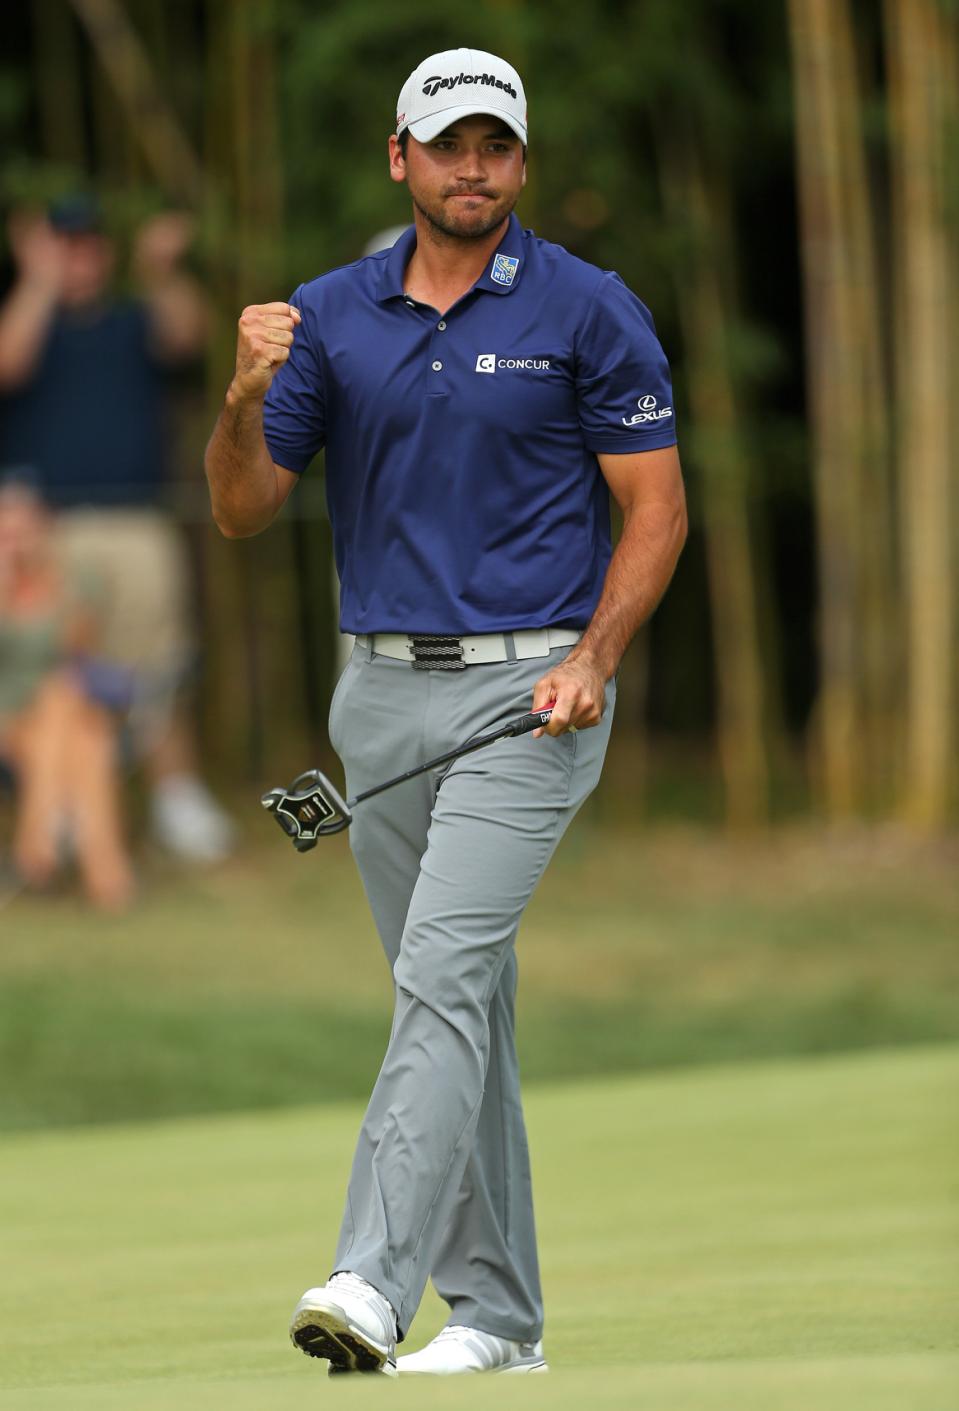 “Let’s Go Streaking” Jason Day Wins at The Barclays | Links Life Golf